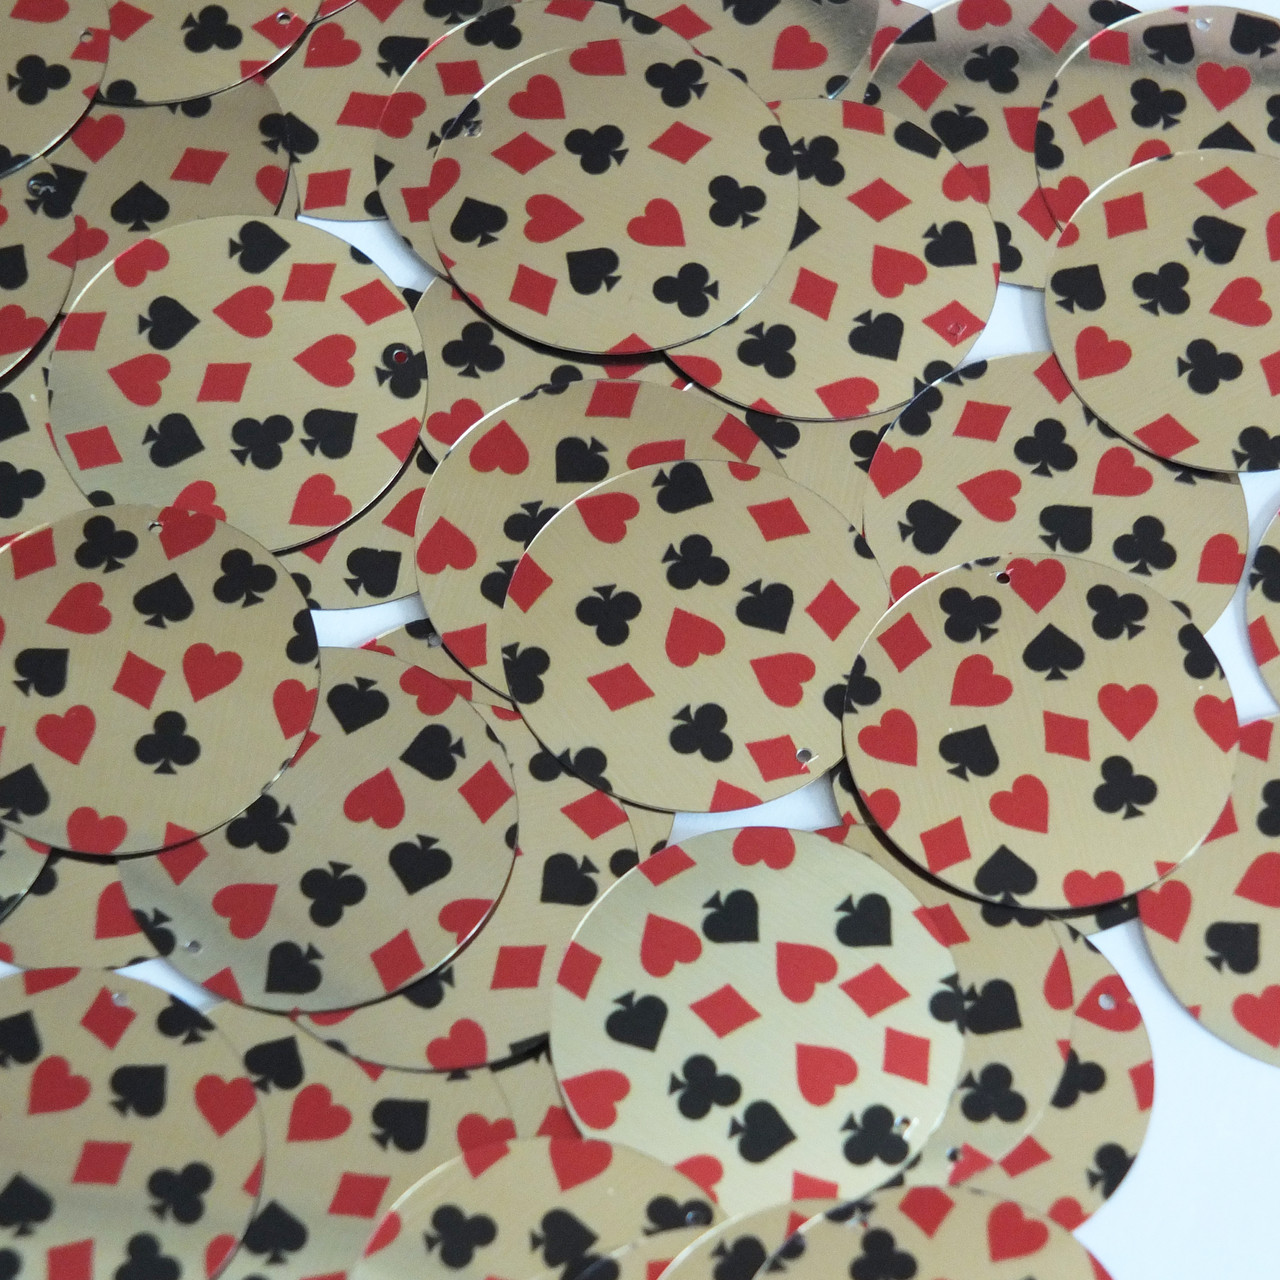 Round Sequins 30mm Playing Card Clubs Hearts Spades Diamonds Gold Metallic